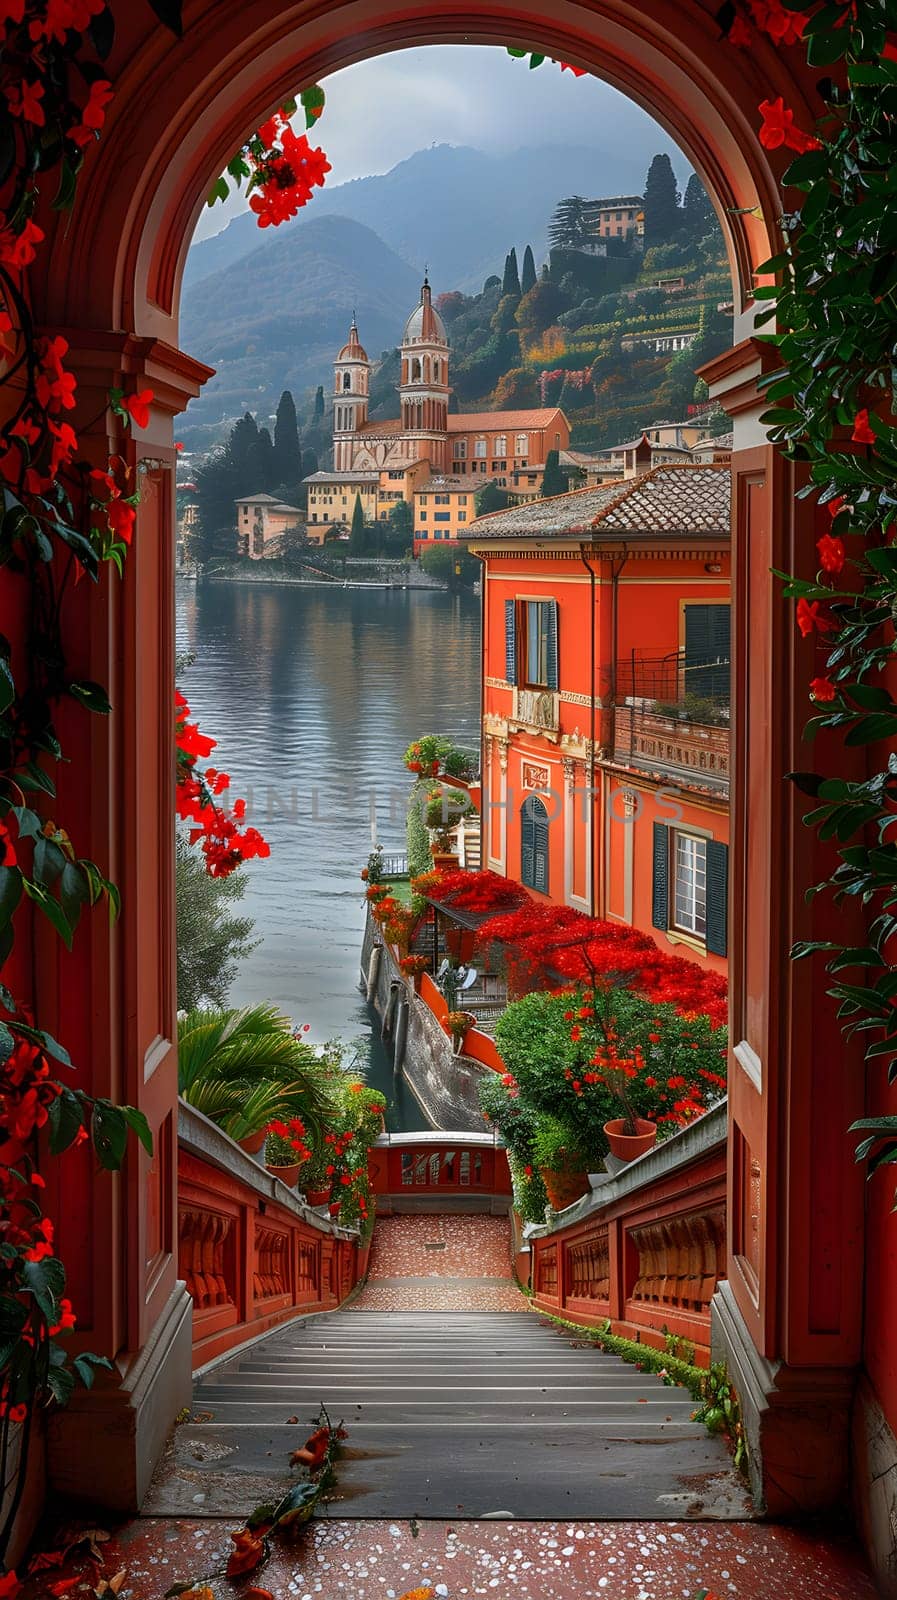 A view of the lake framed by an archway adorned with beautiful red flowers, creating a picturesque scene with the buildings architecture and the sky in the background